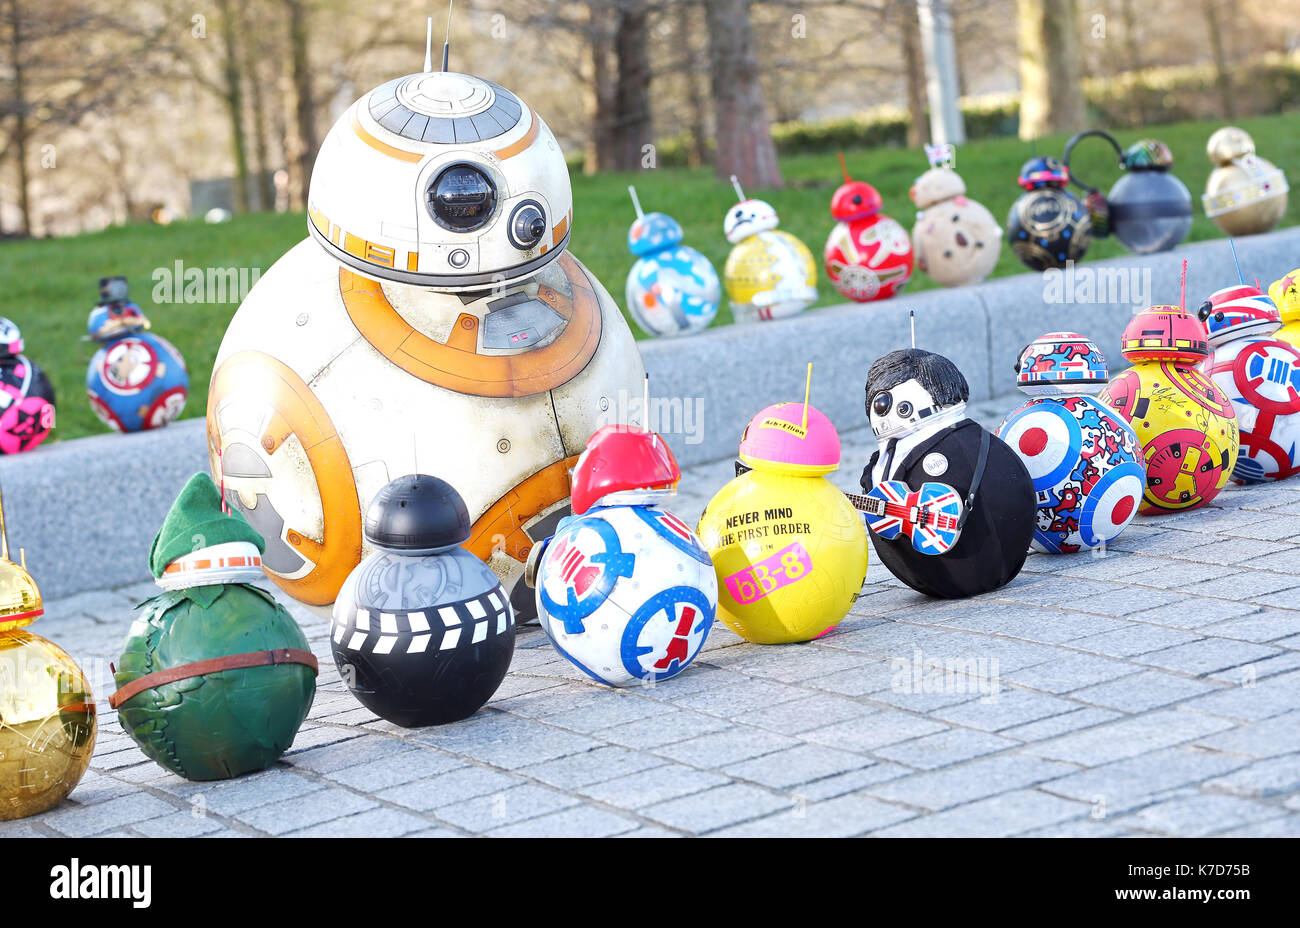 Photo Must Be Credited ©Alpha Press 065630 18/04/2016 Celebrity Designed BB-8s Line Up for London Charity Exhibition. A congregation of model droids inspired by BB-8 from Star Wars: The Force Awakens and designed by stars of the film and British celebrities, descend on London ahead of an exhibition opening tomorrow to coincide with the Blu-ray and DVD release of the film.Ê The miniature BB-8 models have been designed by celebrities including Mark Hamill, John Boyega, Daisy Ridley, Anthony Daniels, Warwick Davis, Simon Pegg, Jonathan Ross, Years and Years, Alex Brooker and Paddy McGuinness and  Stock Photo